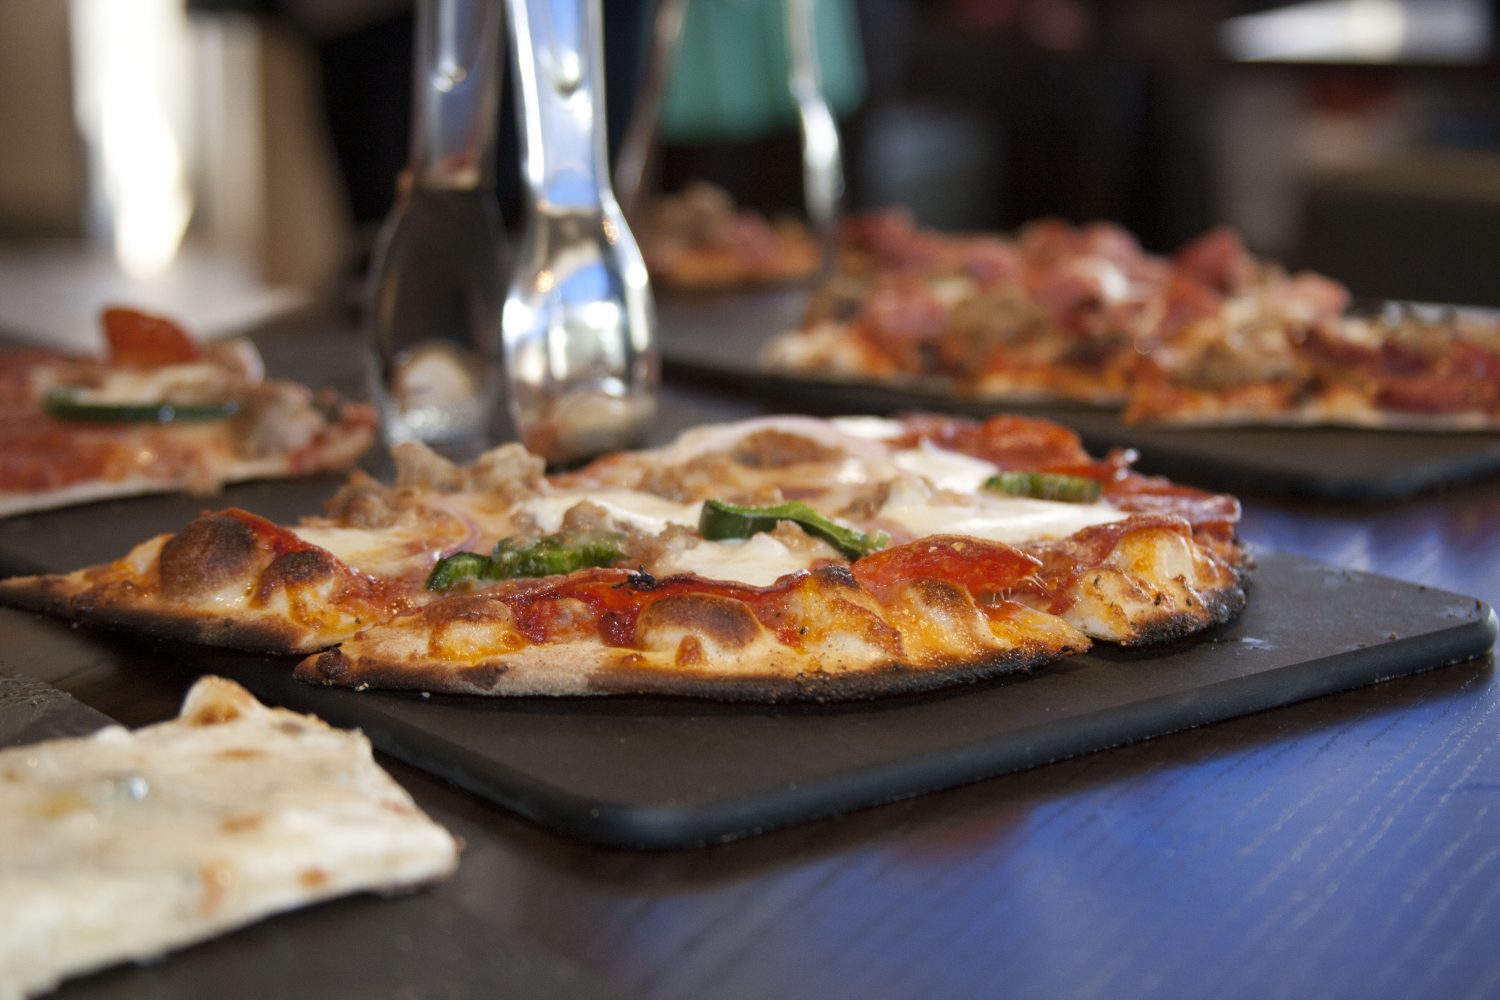 Pizzas+from+a+wood-burning+oven+at+SLU%E2%80%99s+newest+restaurant.+